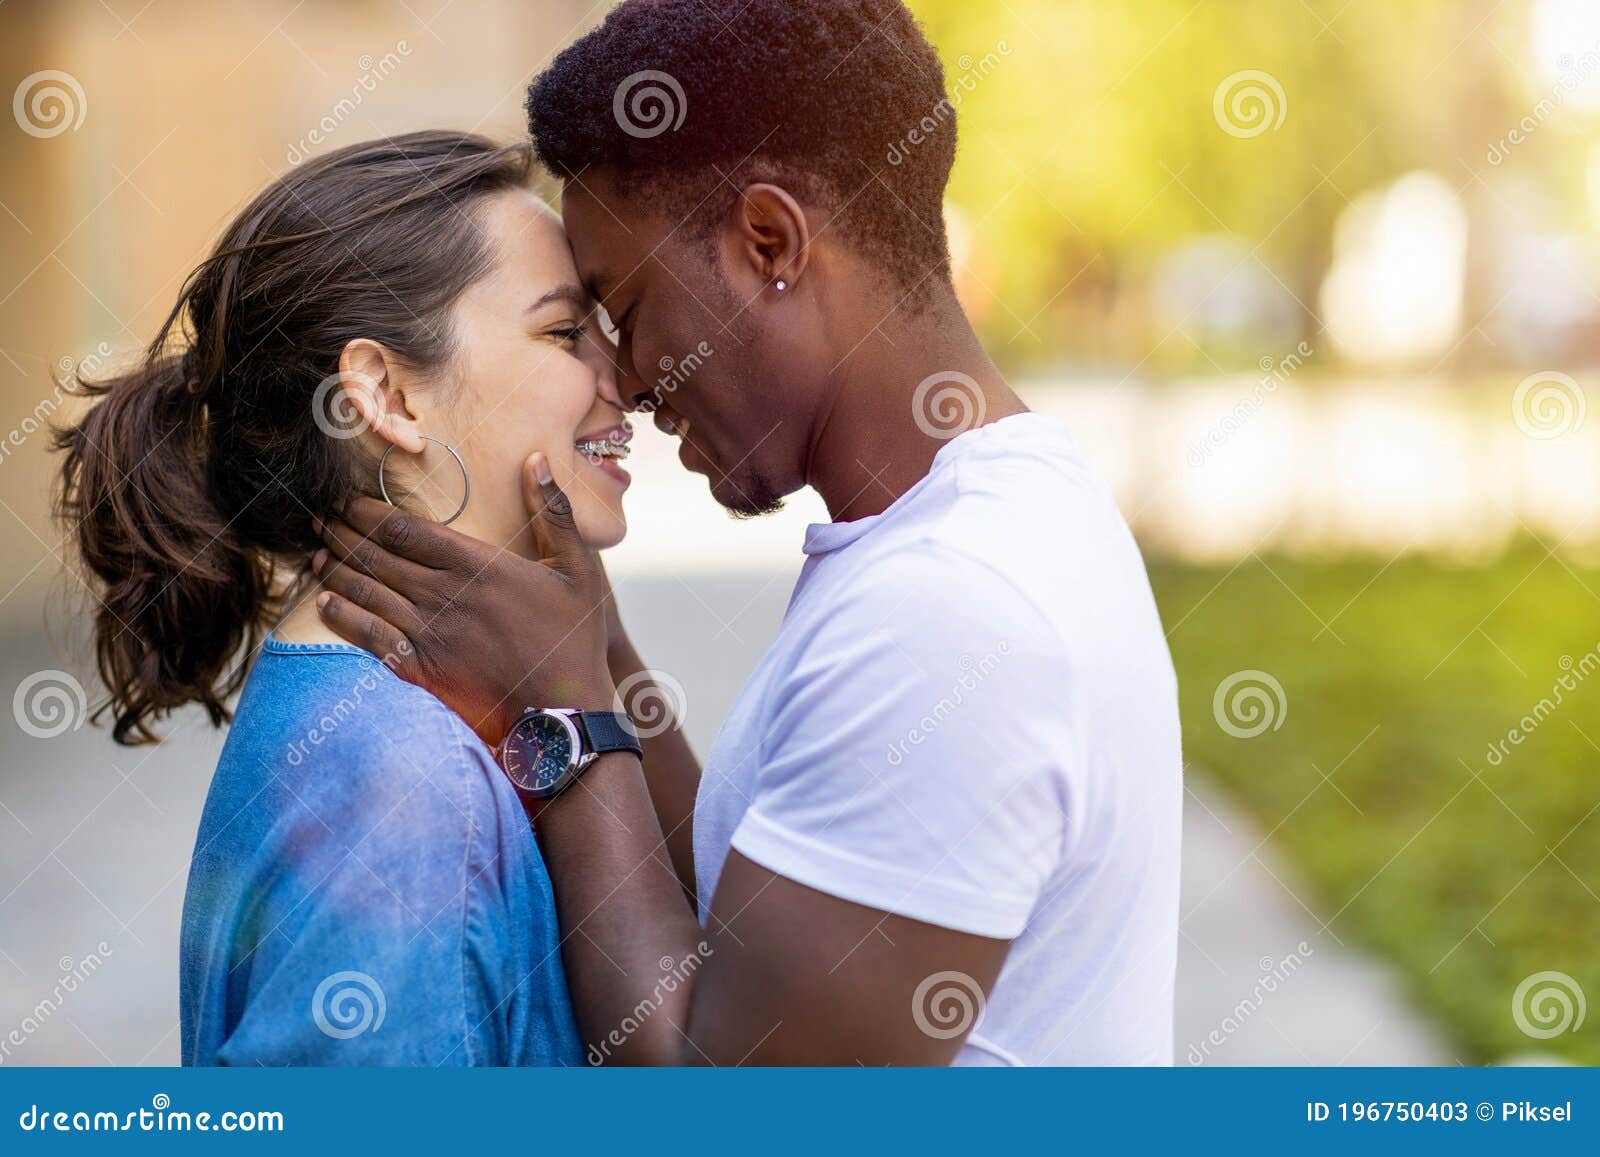 Multiracial Young Couple Kissing Outdoors Stock Image Image Of